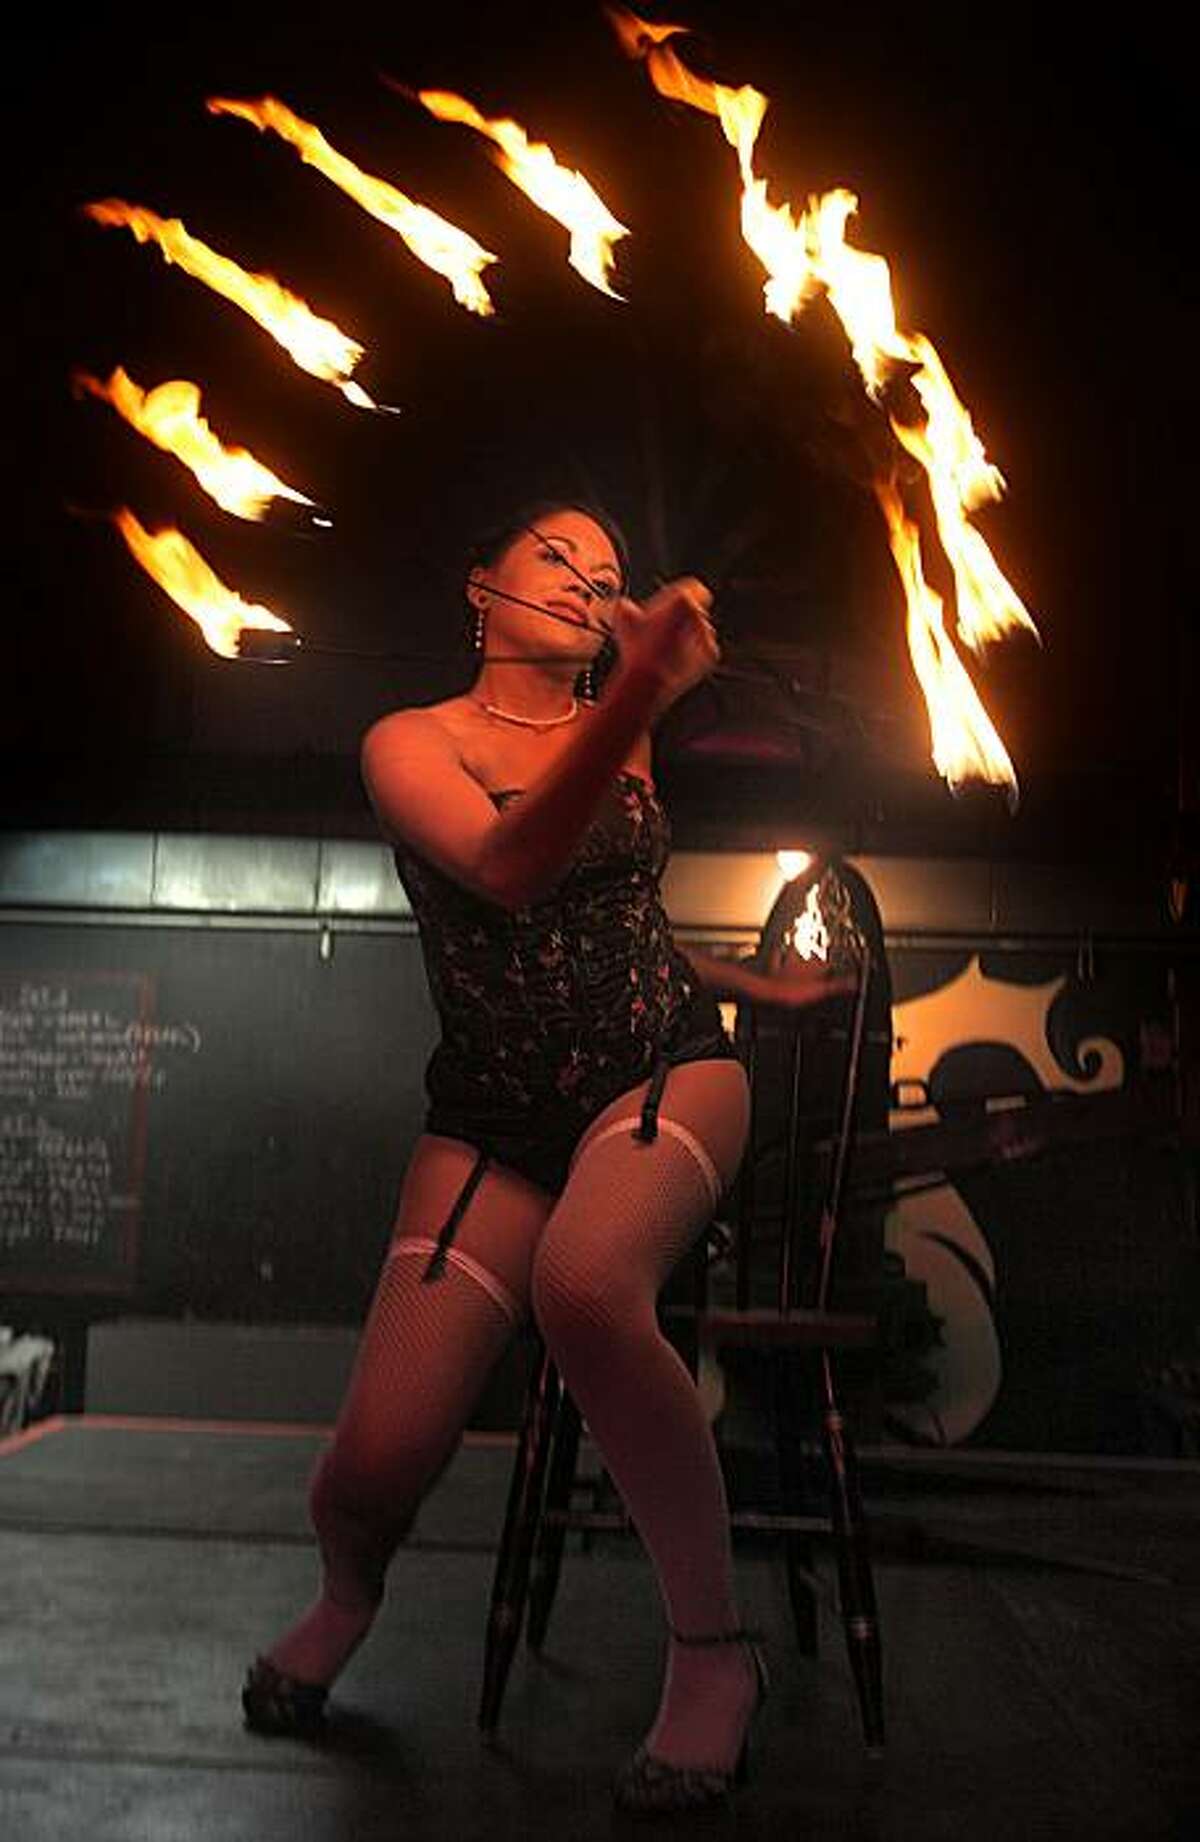 Luna Del Fuego from Santa Cruz performing at a fundraising night for The Crucible, a nonprofit that teaches blacksmithing, jewelry-making, wood-working and other industrial arts to teens and adults in Oakland, Calif., on Friday, July 16, 2010.